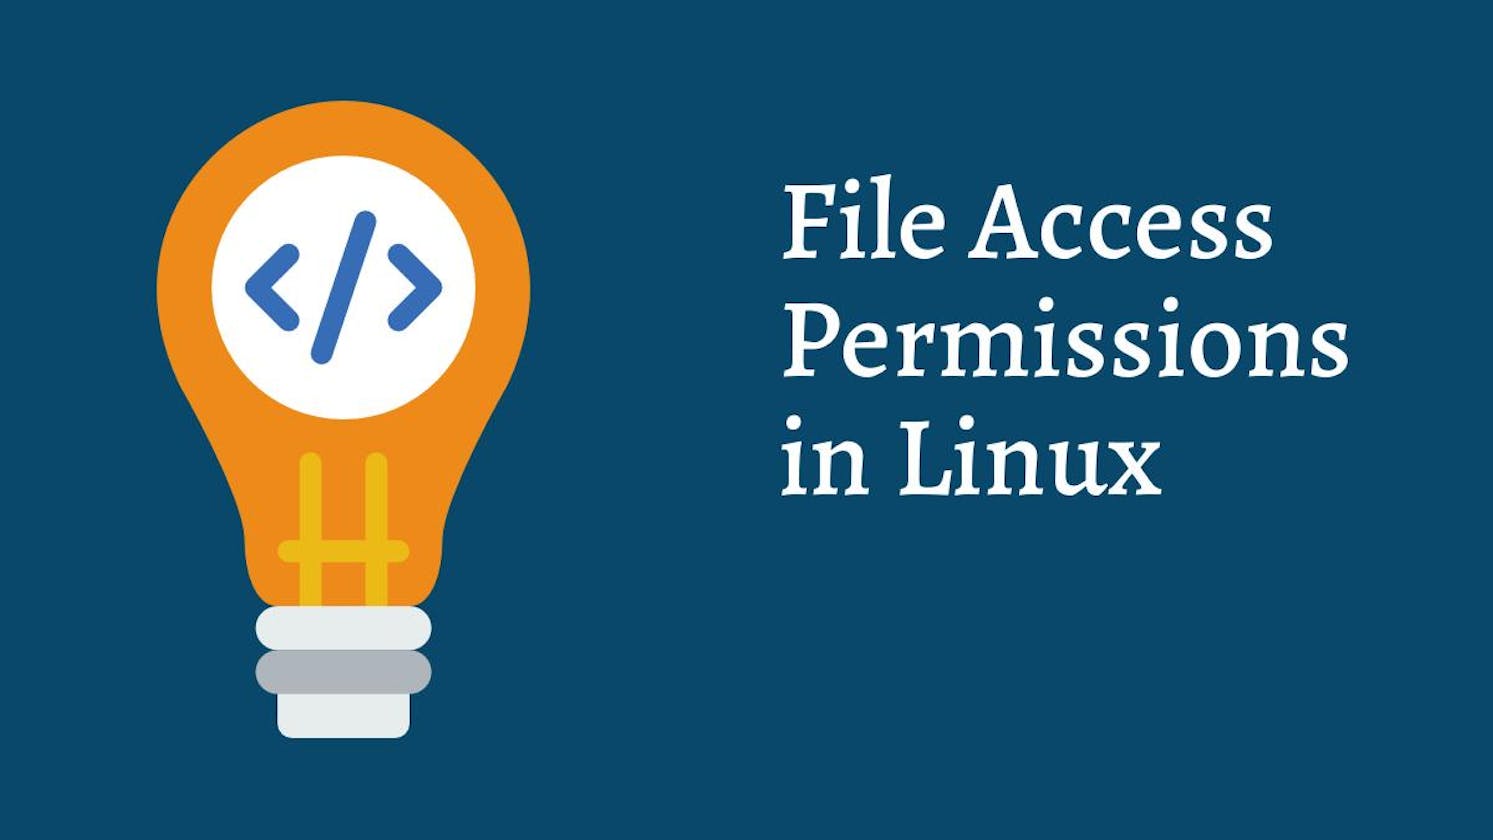 Day 4: How to Identify/ Change the file permissions